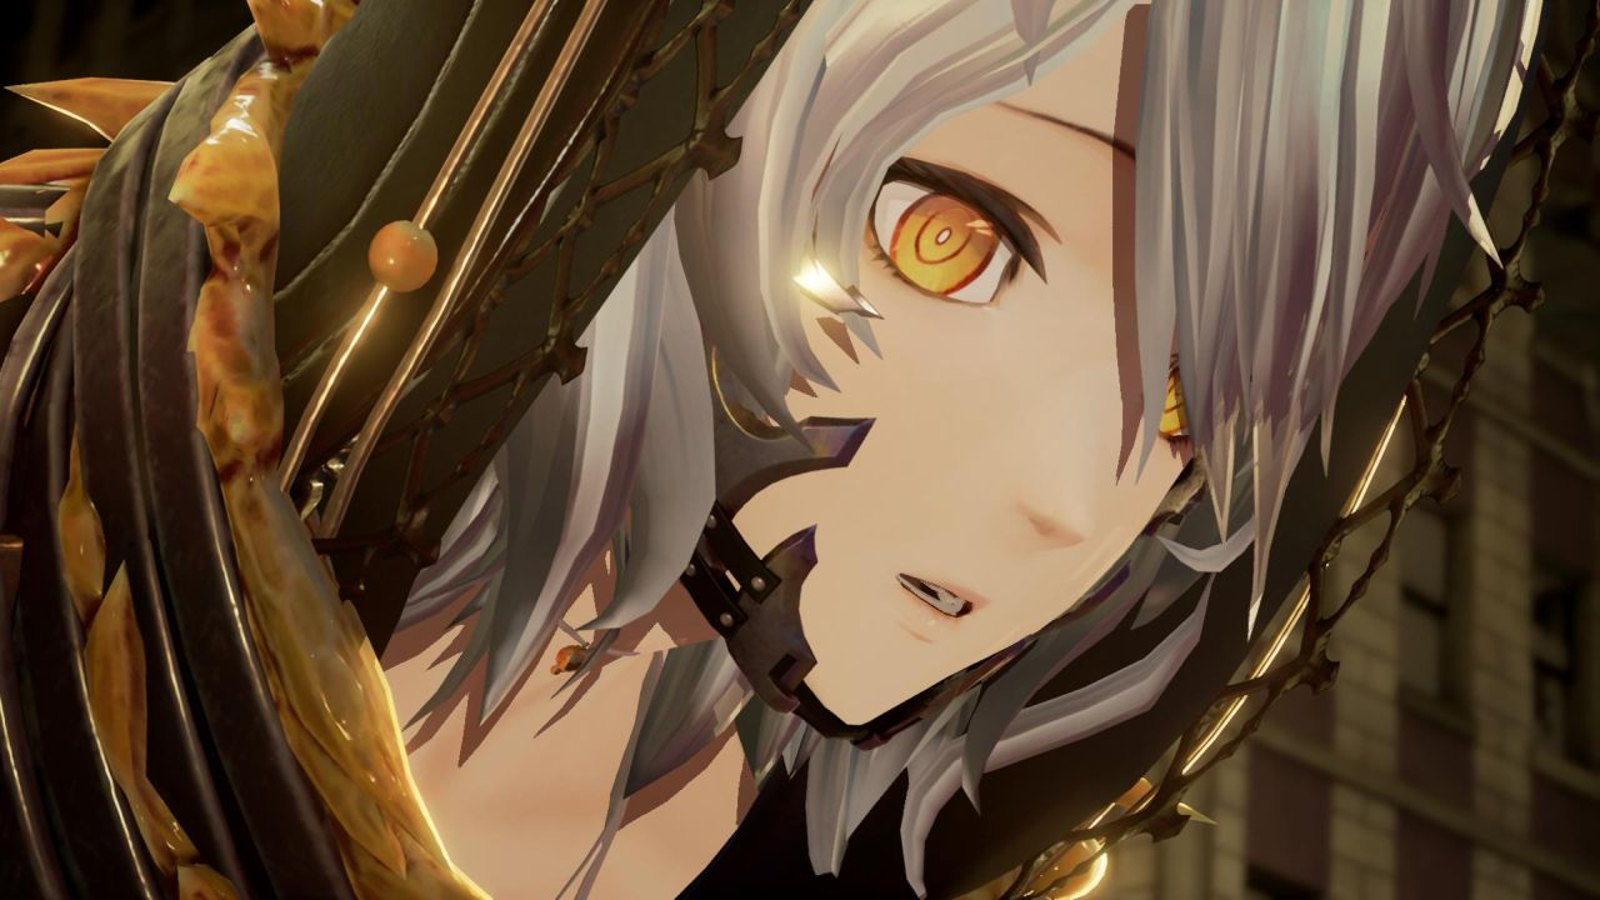 Code Vein Weapons Gameplay, The weapons of Code Vein., By GameSpot